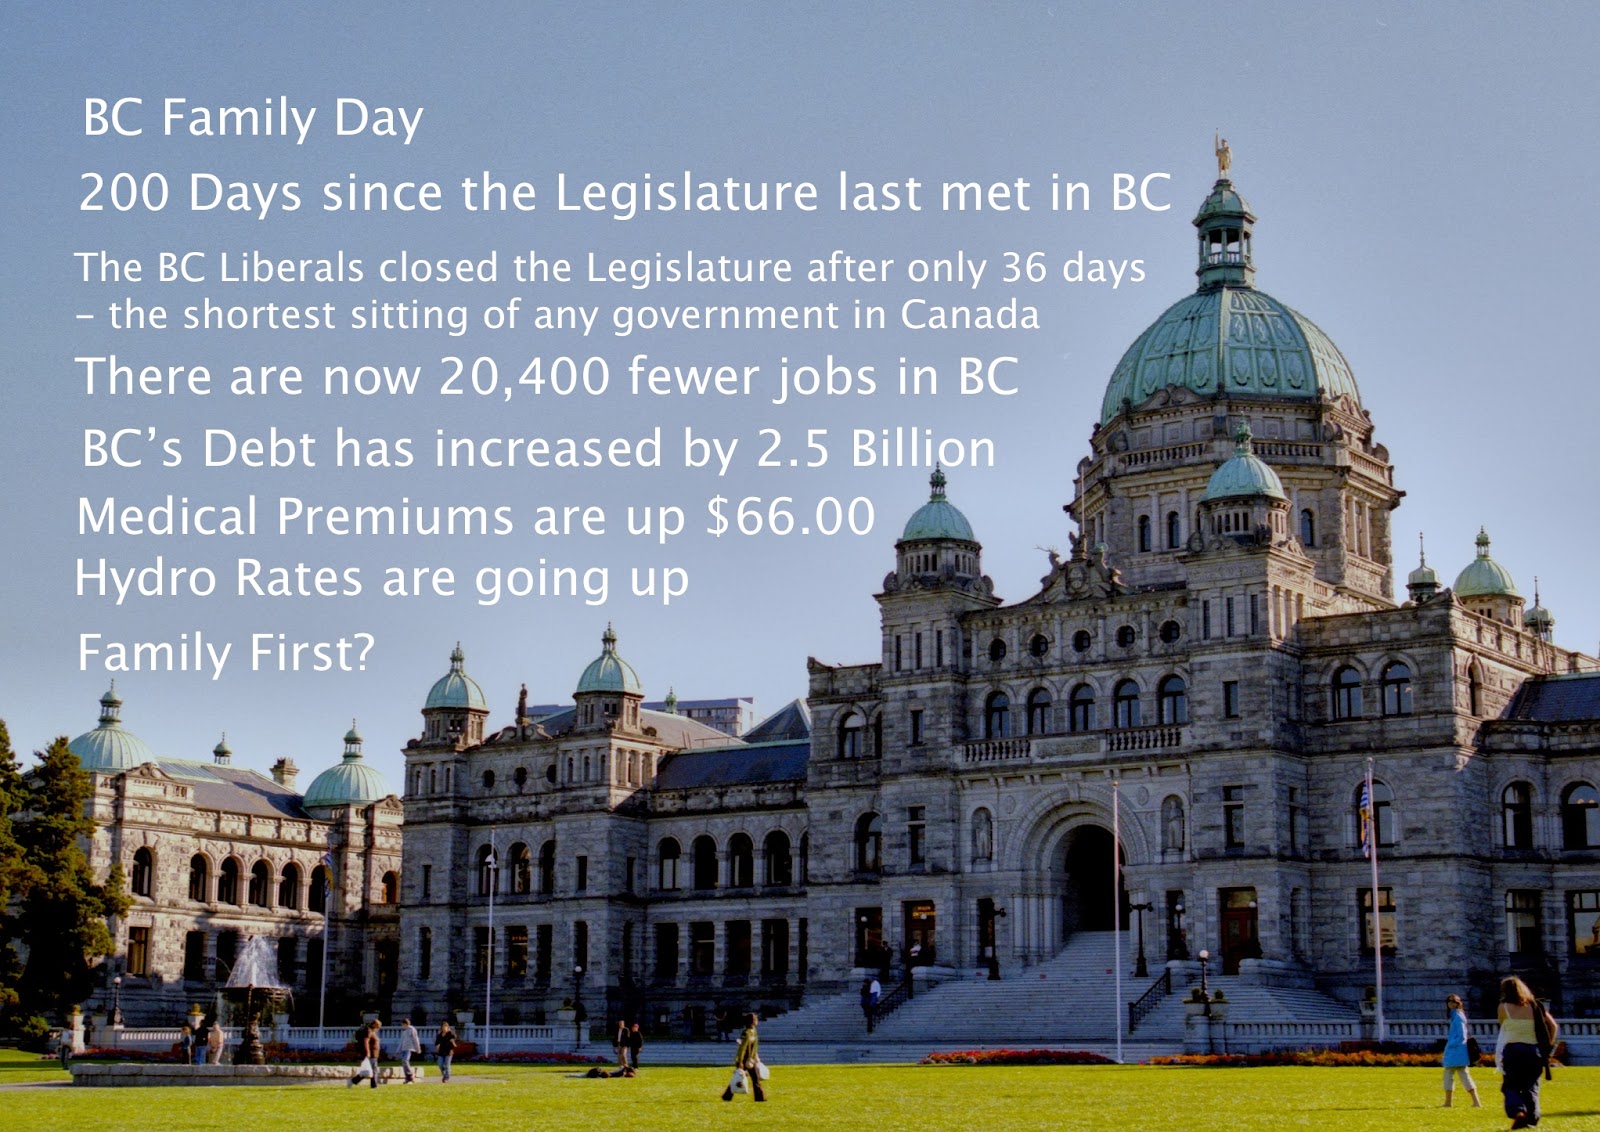 BC Teacher Info: BC Family Day - Day-off # 200 for the BC Liberals in